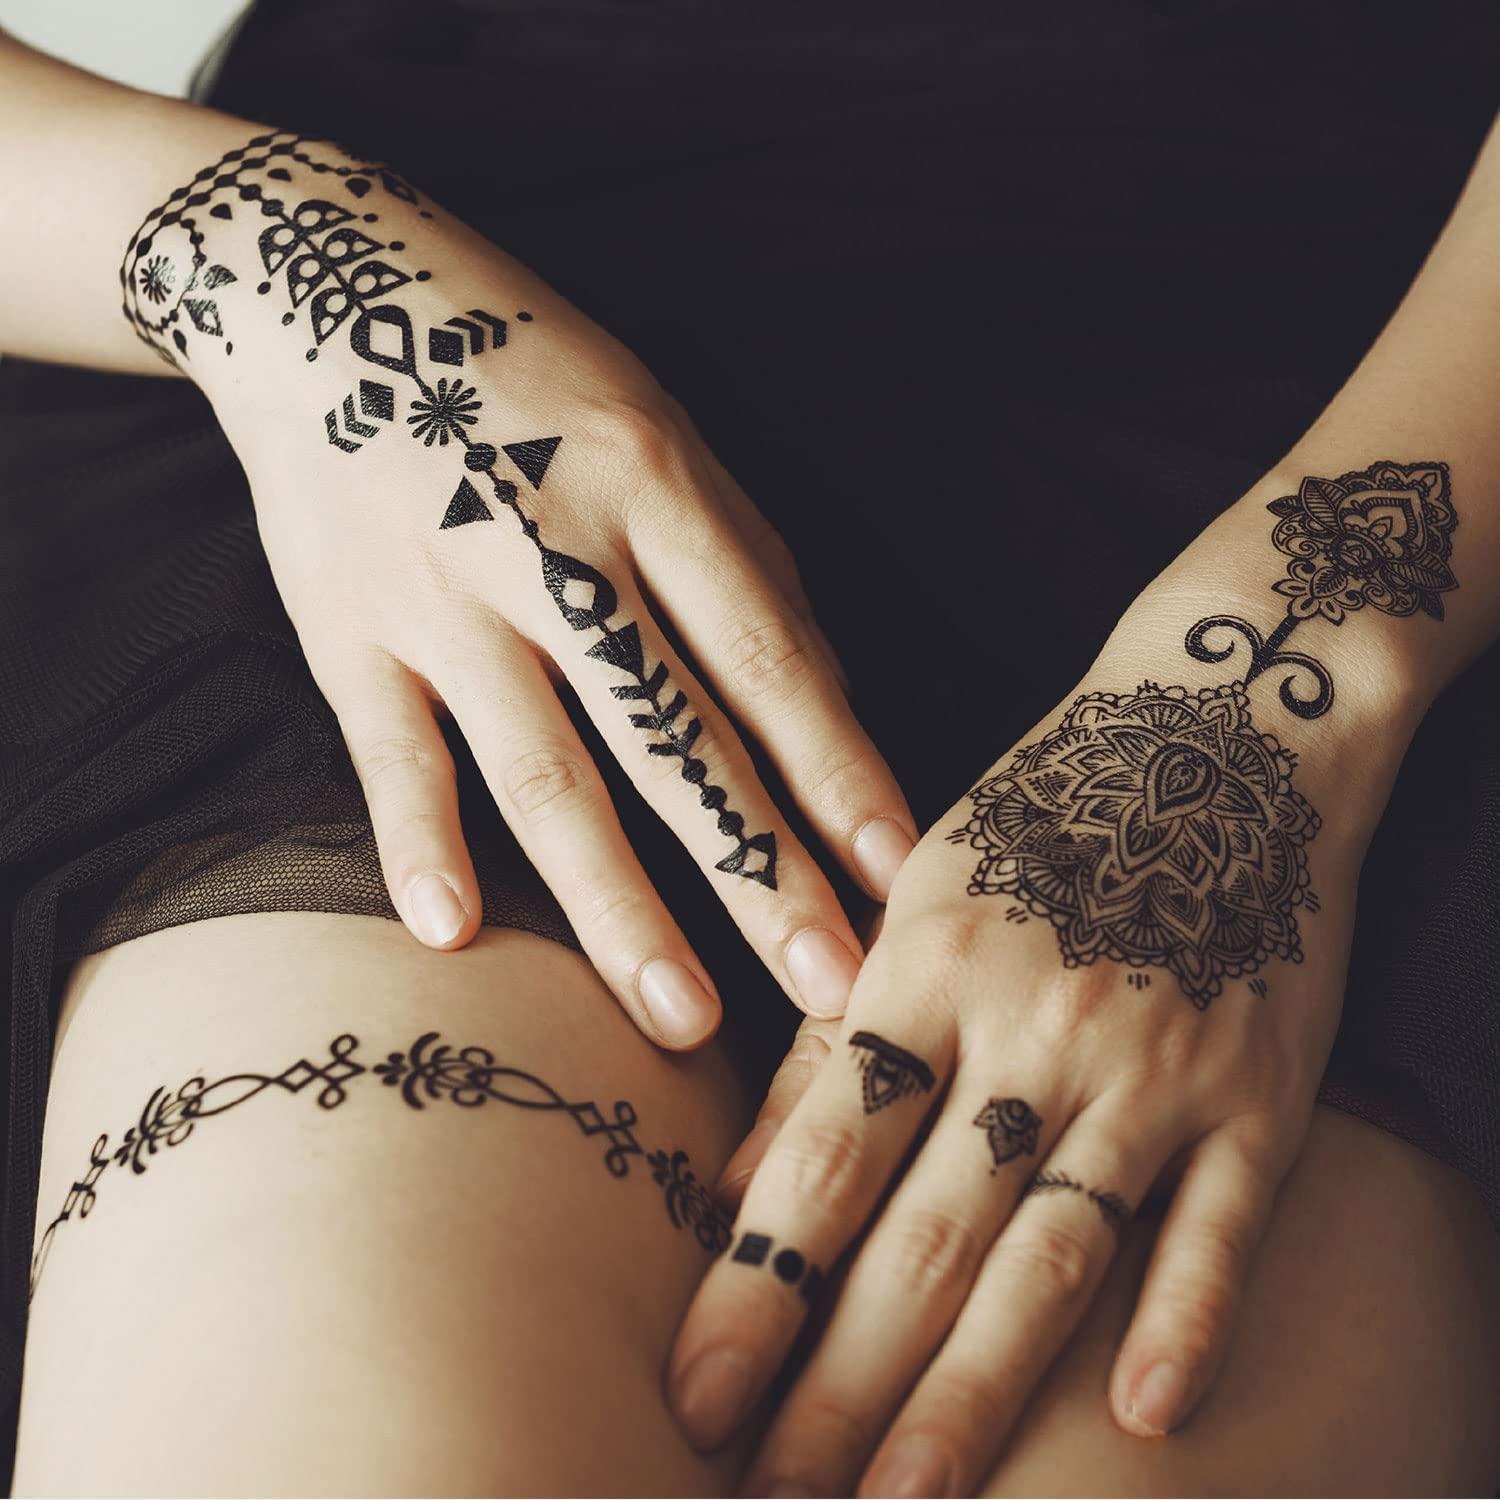 Buy Supperb Temporary Tattoos Inspired Henna Mehndi Design II, Henna Style  Tattoos Online in India - Etsy